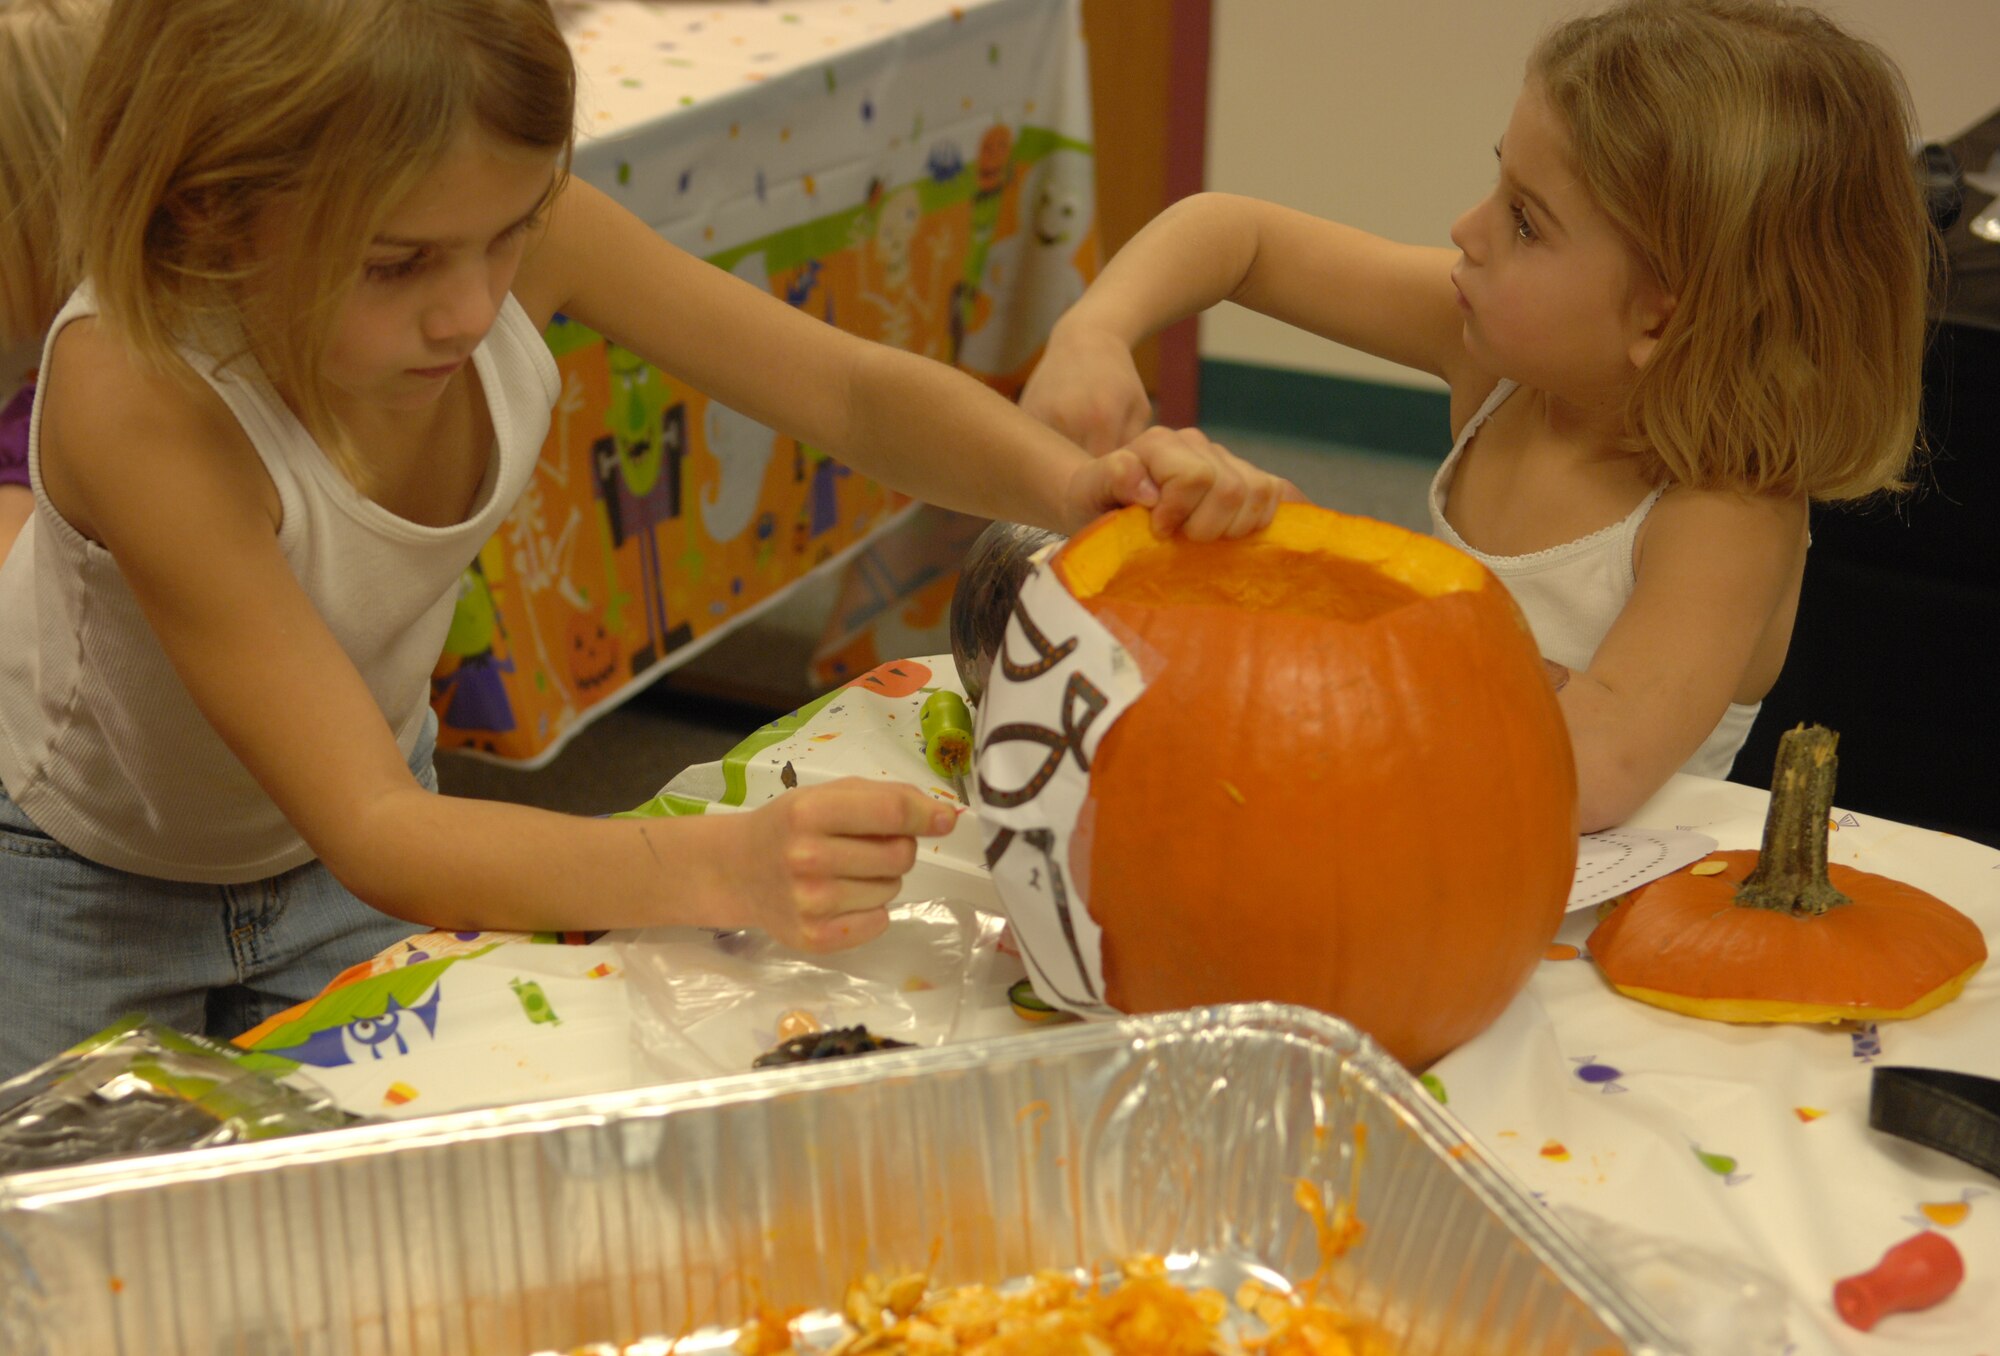 Madisyn and Elizabeth Peterson, daughters of Staff Sgt. Matthew Peterson, 354th Logistics Readiness Squadron, carve pumpkins during a class at the Airman and Family Readiness Center Oct. 30, 2009, Eielson Air Force Base, Alaska. The pumpkin carving class is one of the many different classes the Airman and Family Readiness Center offers for Airmen and their families. (U.S. Air Force photo/Airman 1st Class Rachelle Coleman)